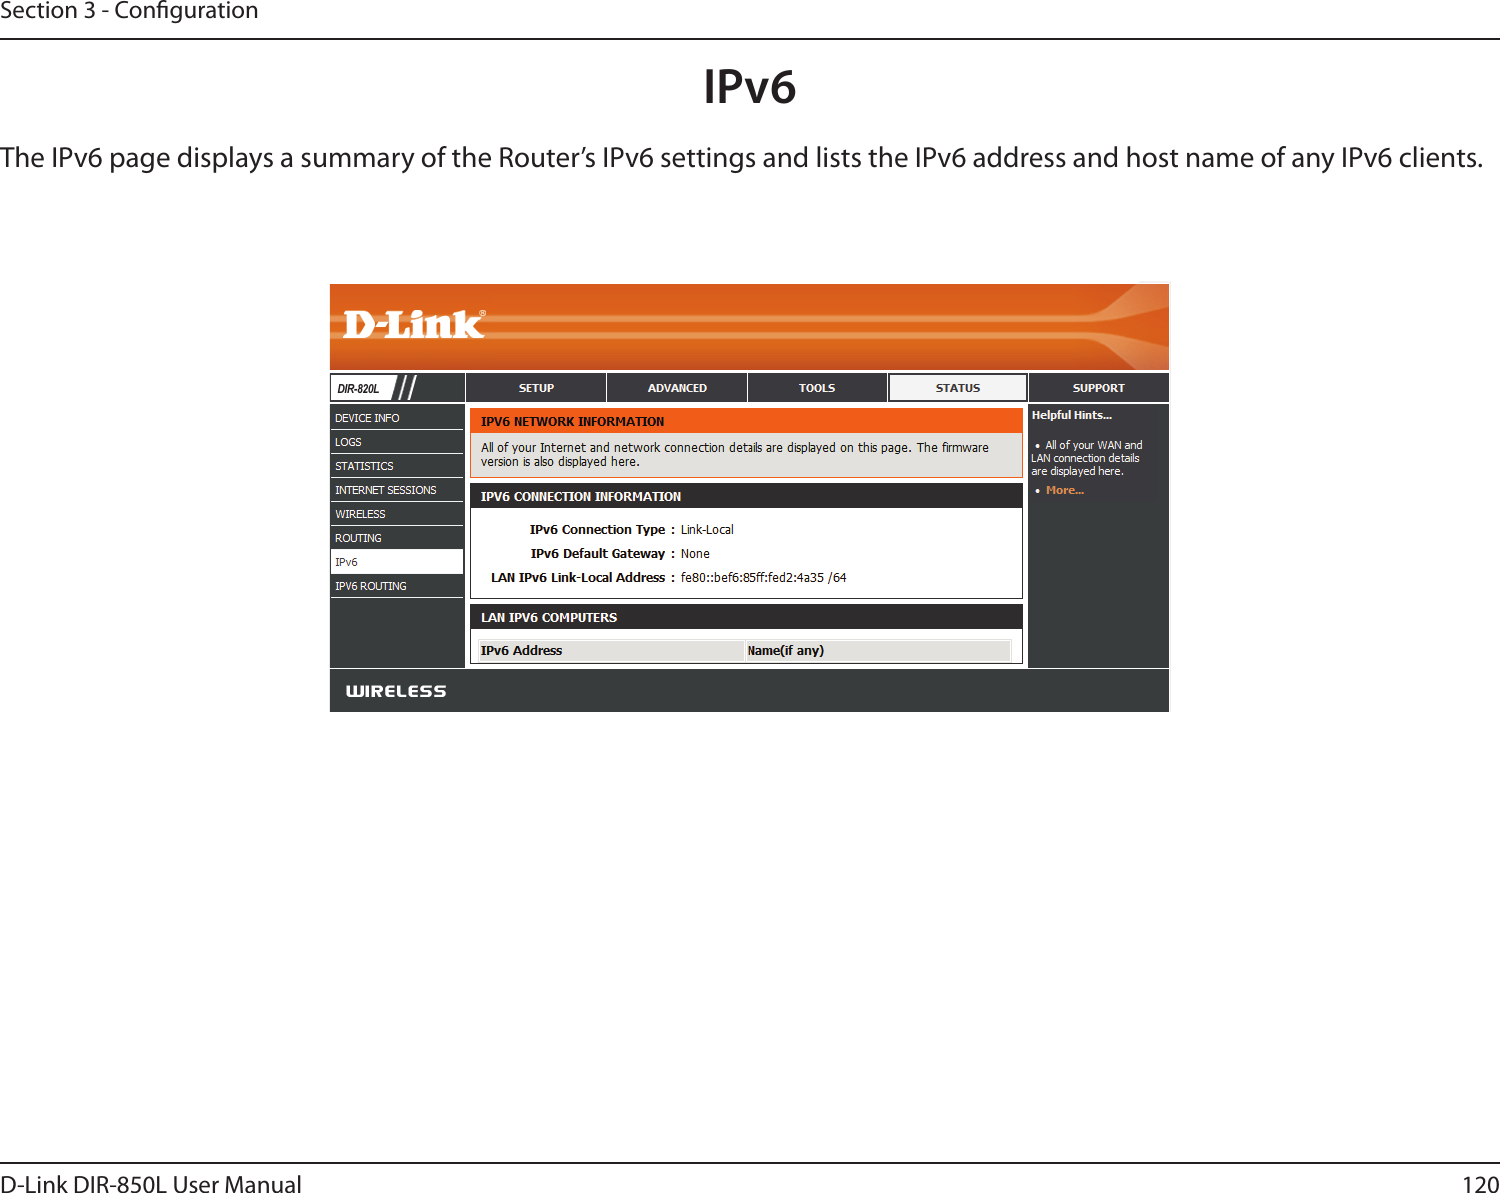 120D-Link DIR-850L User ManualSection 3 - CongurationIPv6The IPv6 page displays a summary of the Router’s IPv6 settings and lists the IPv6 address and host name of any IPv6 clients. DIR-820L